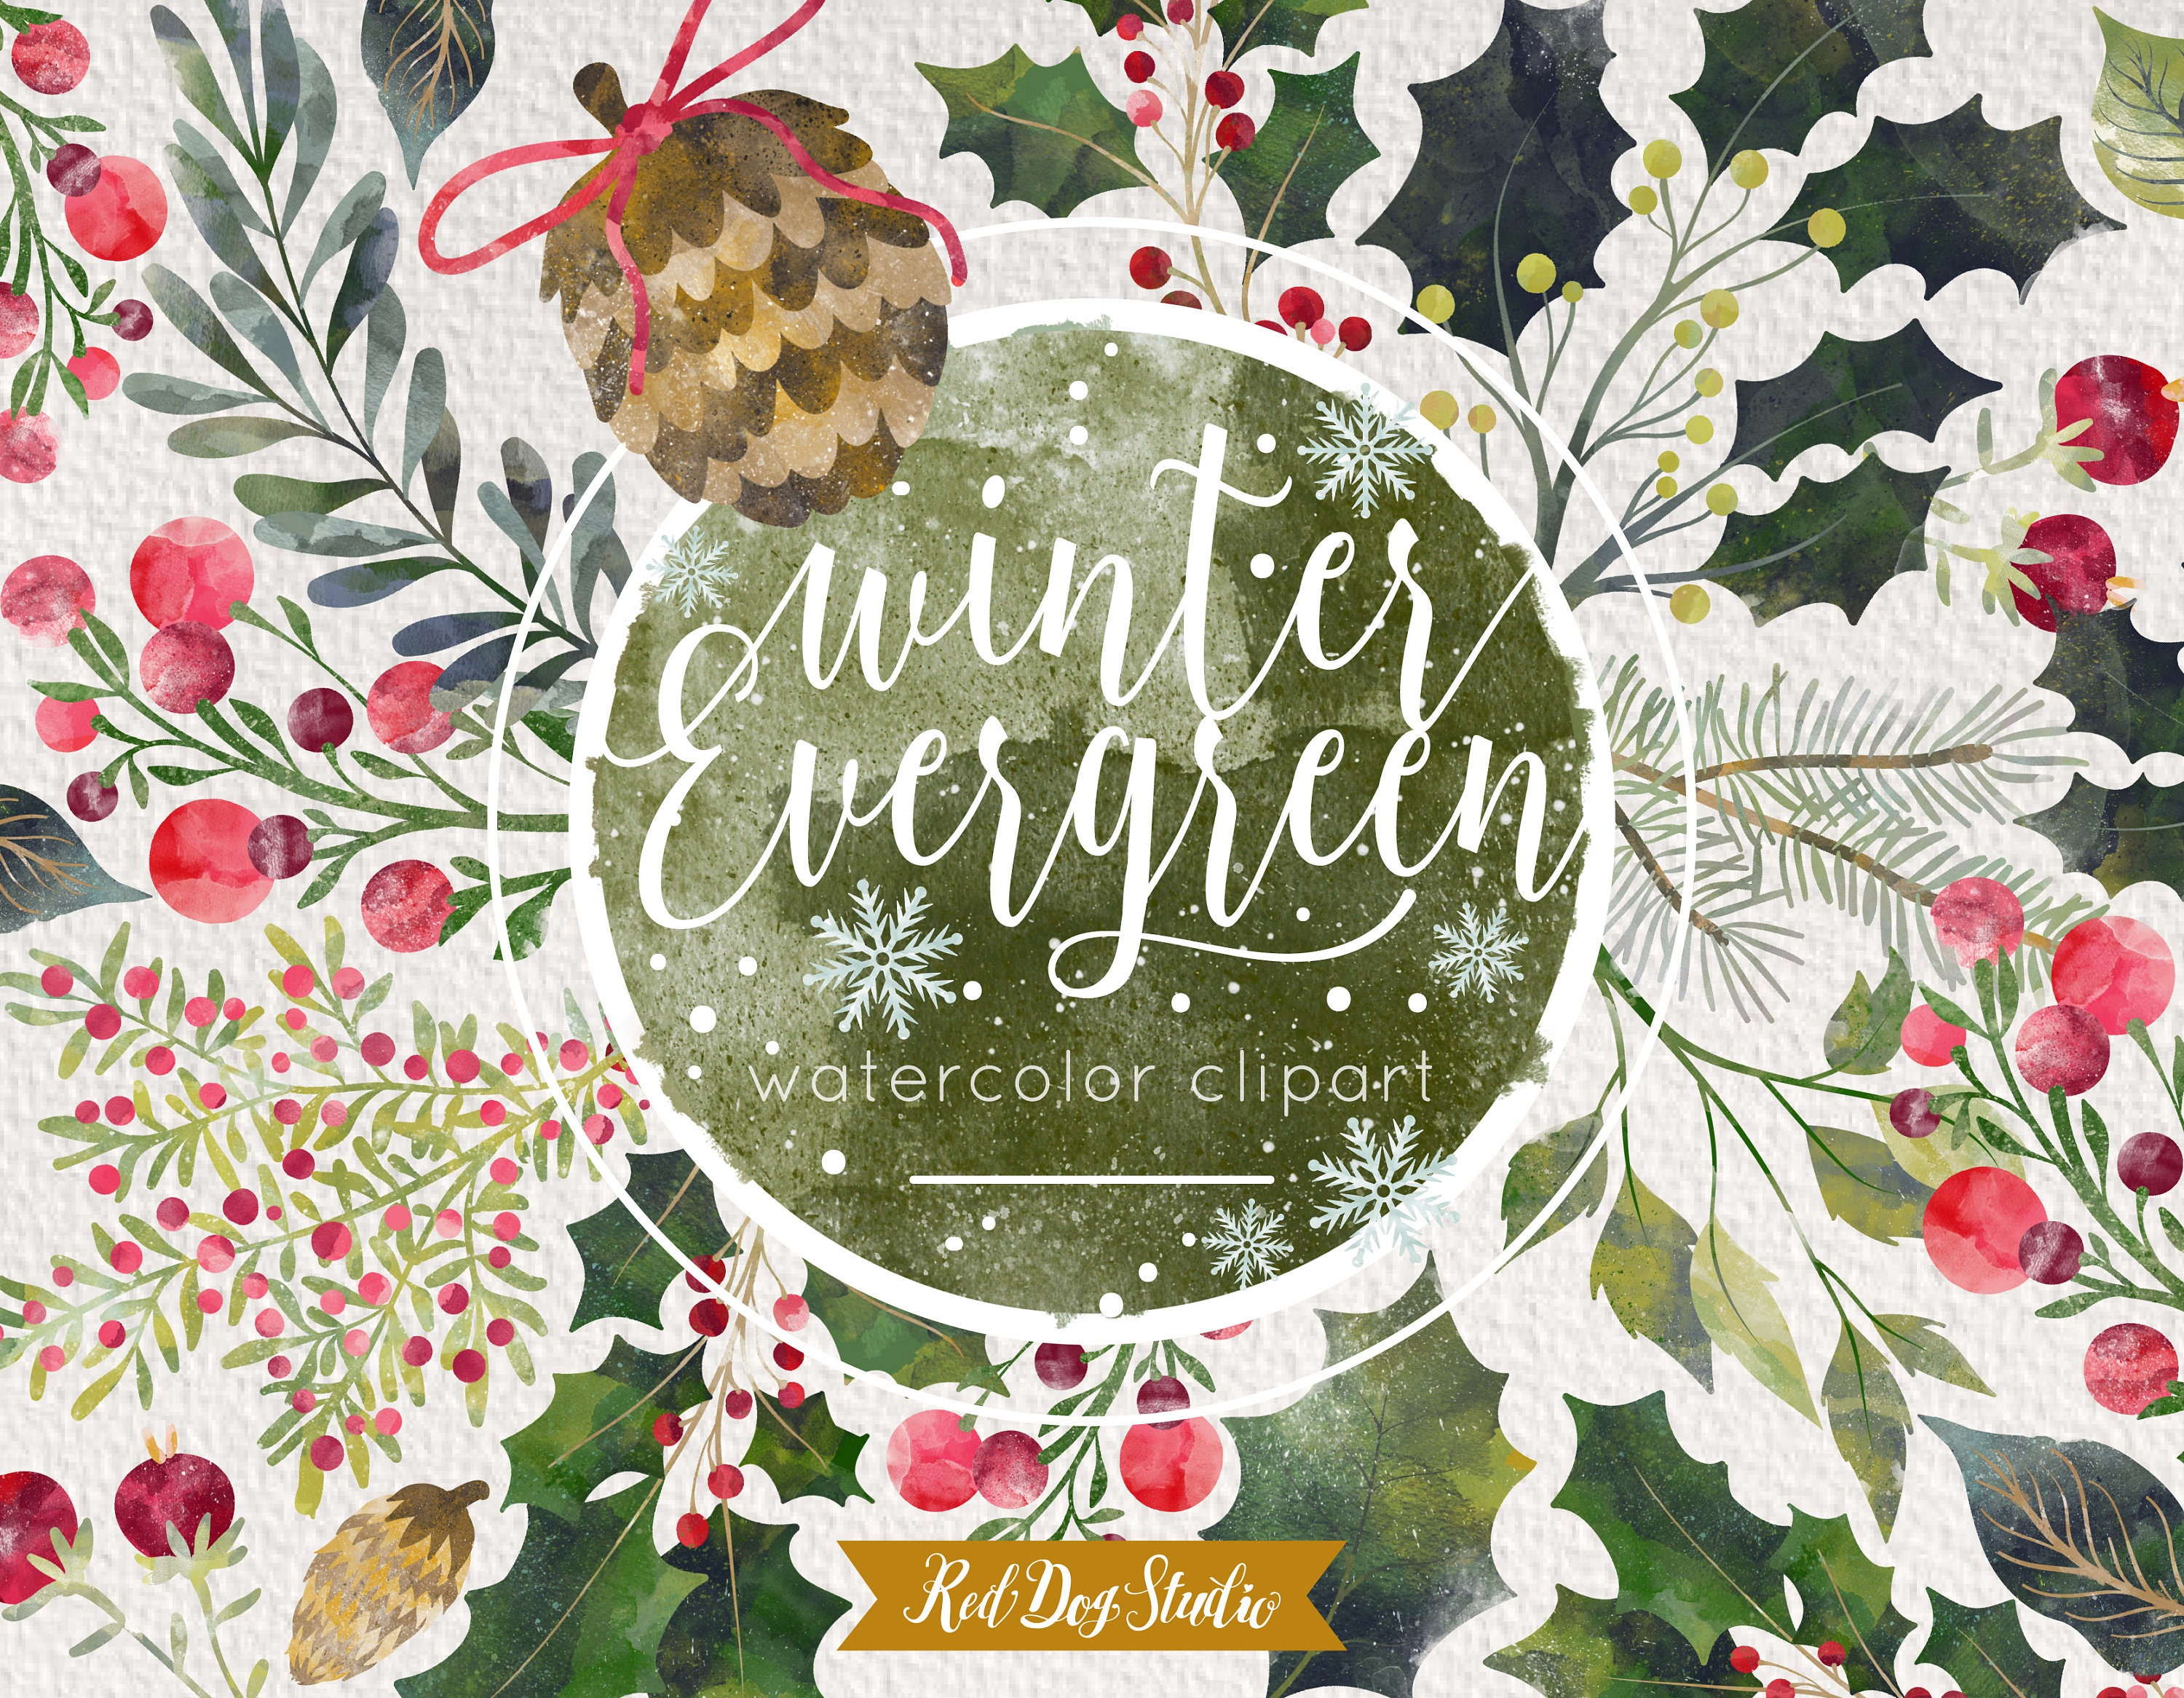 Winter Greenery Clipart, Watercolor Winter Clipart, Watercolor Greenery,  Pine Branch, Pine Cone, Mistletoe, Poinsettia, Christmas Clipart 